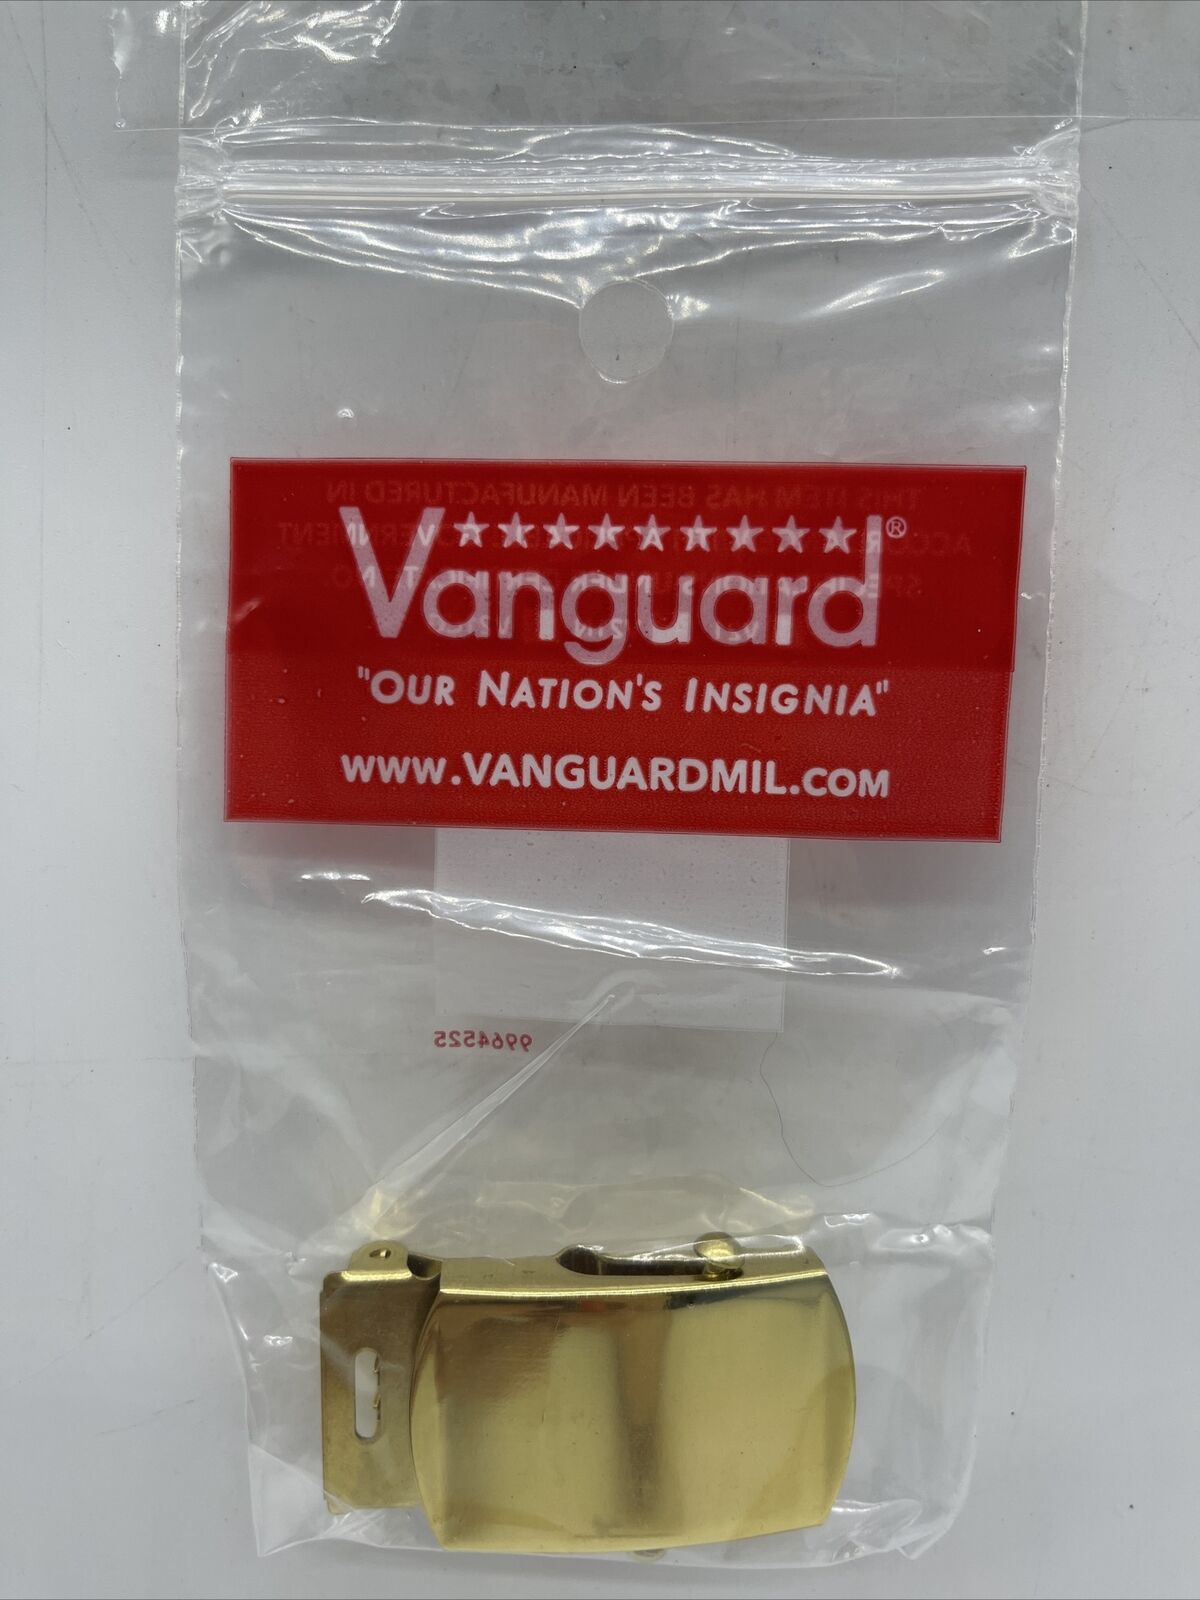 1” Vanguard V-21 Military Dress Solid Brass belt buckle MADE IN USA-NEW IN BAG